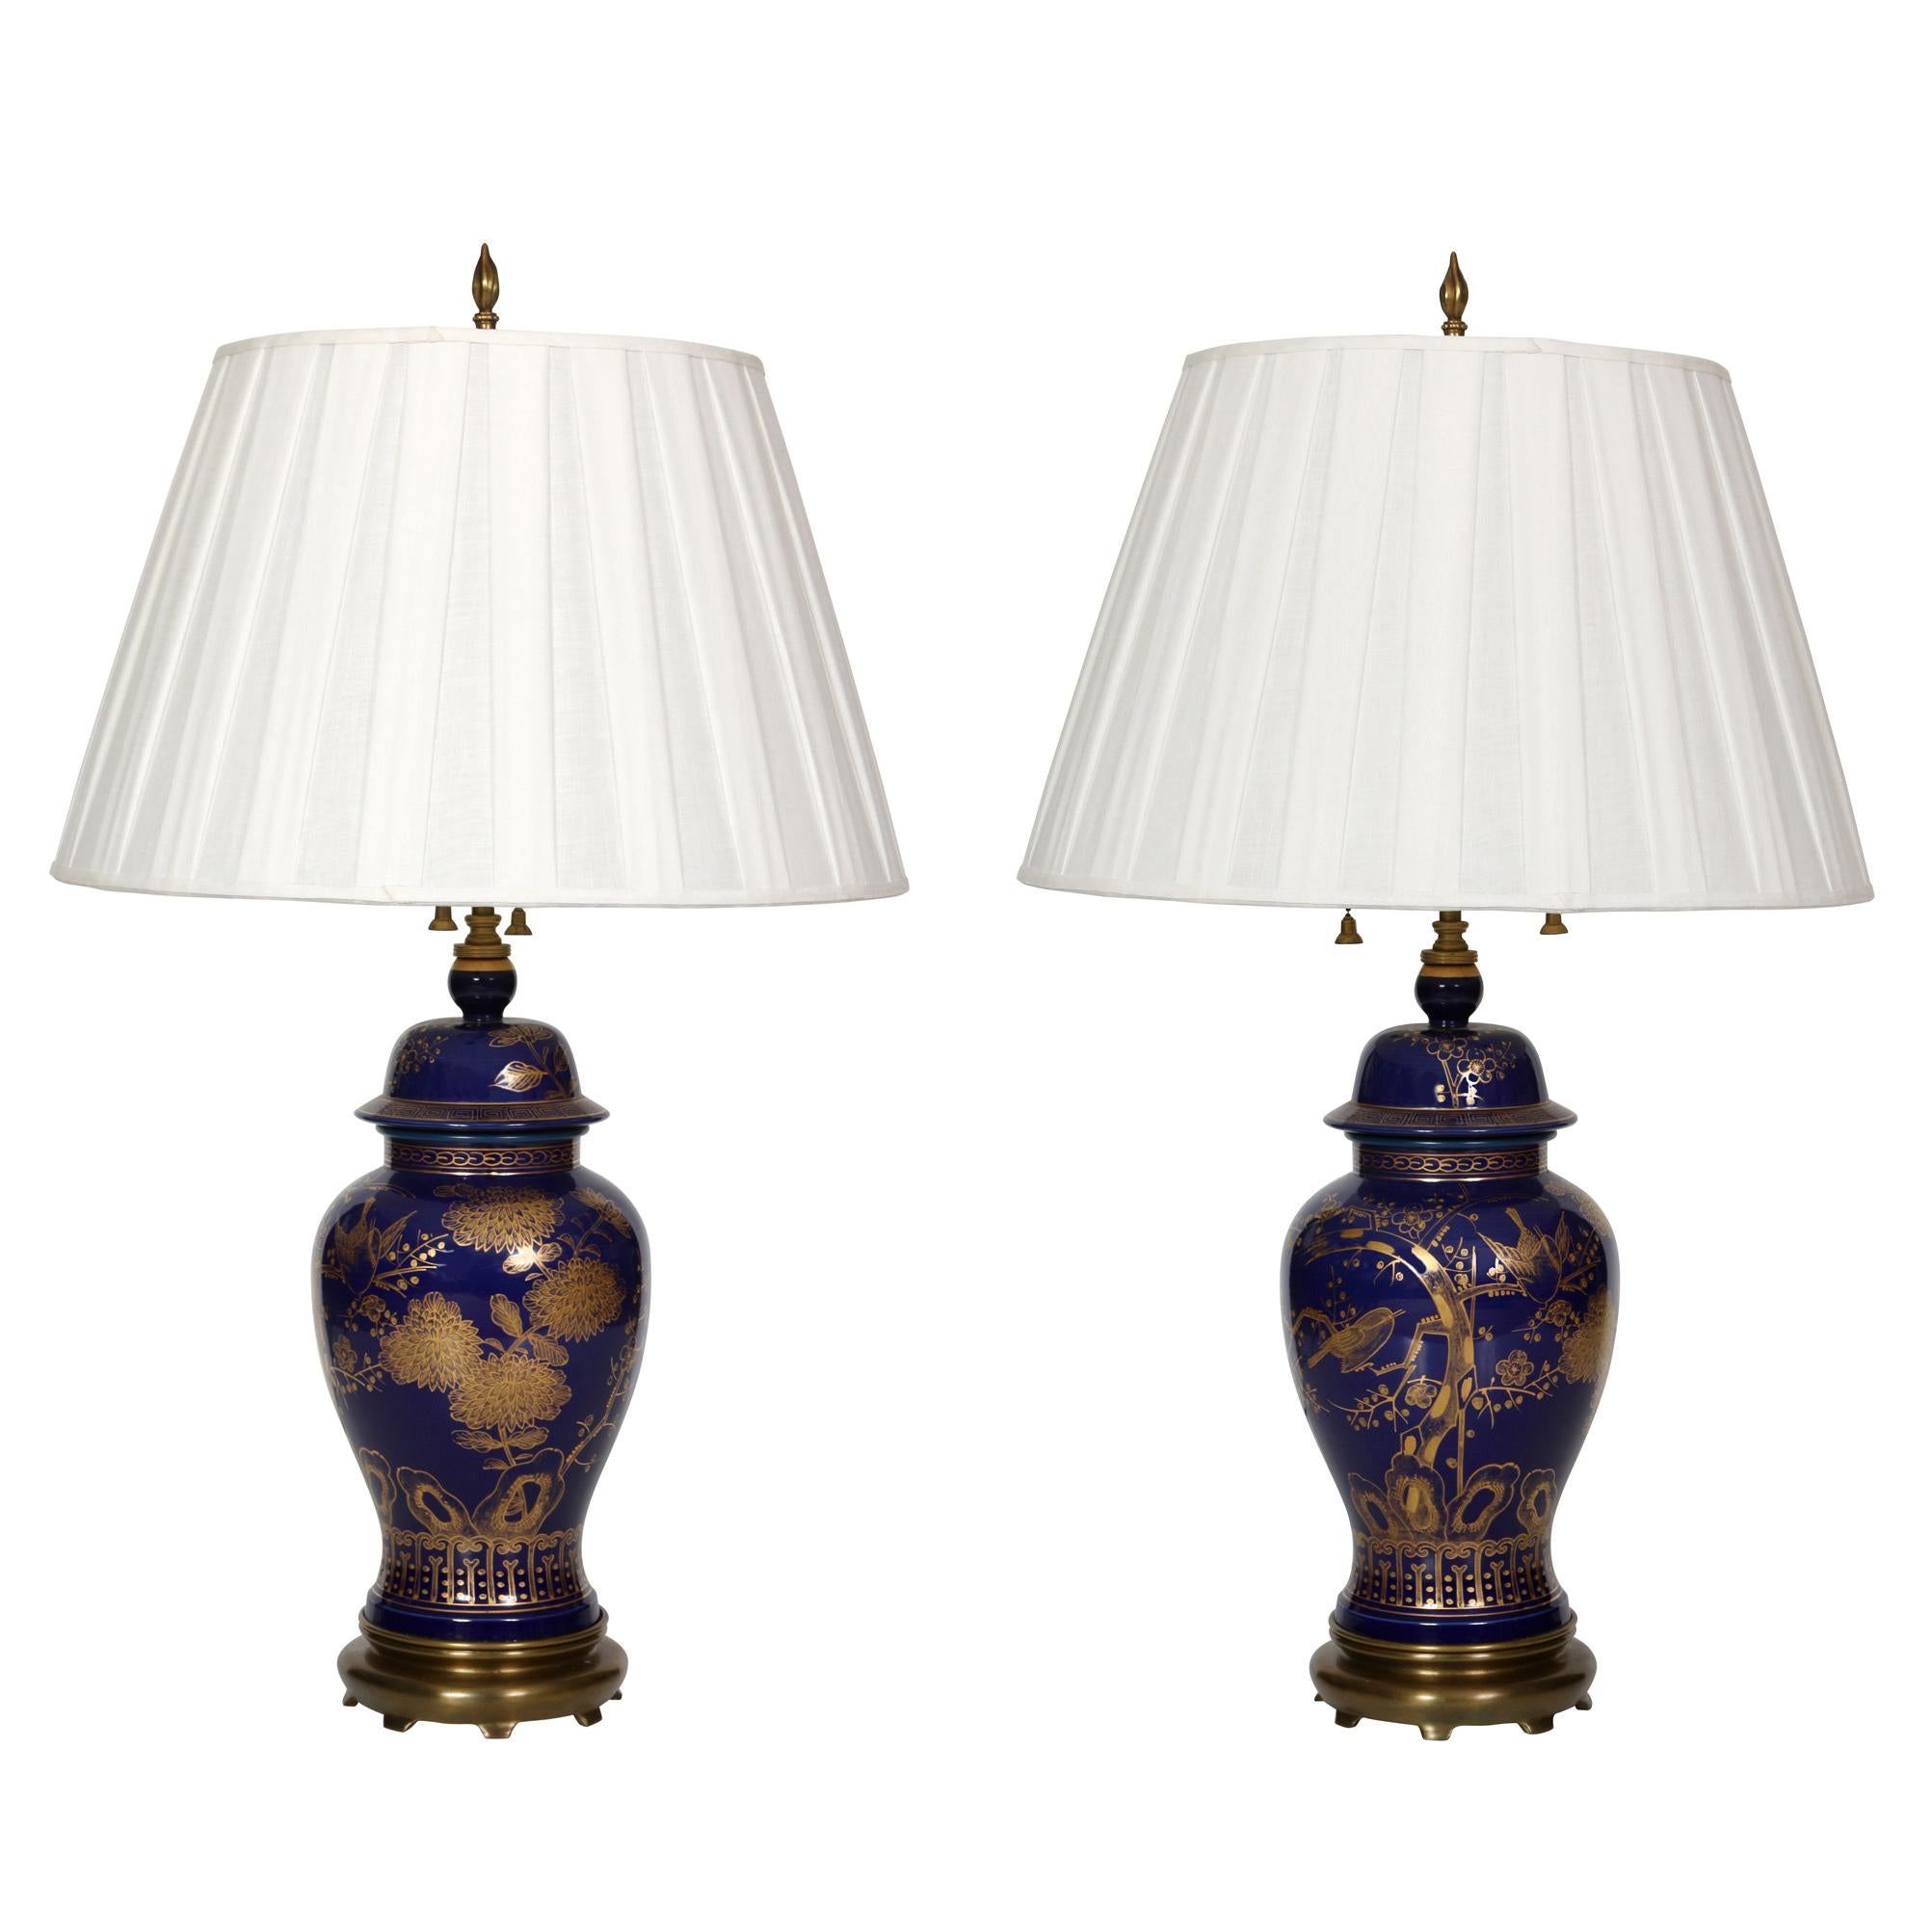 20th Century Pair of Navy and Gilt Asian Vases Mounted as Lamps For Sale